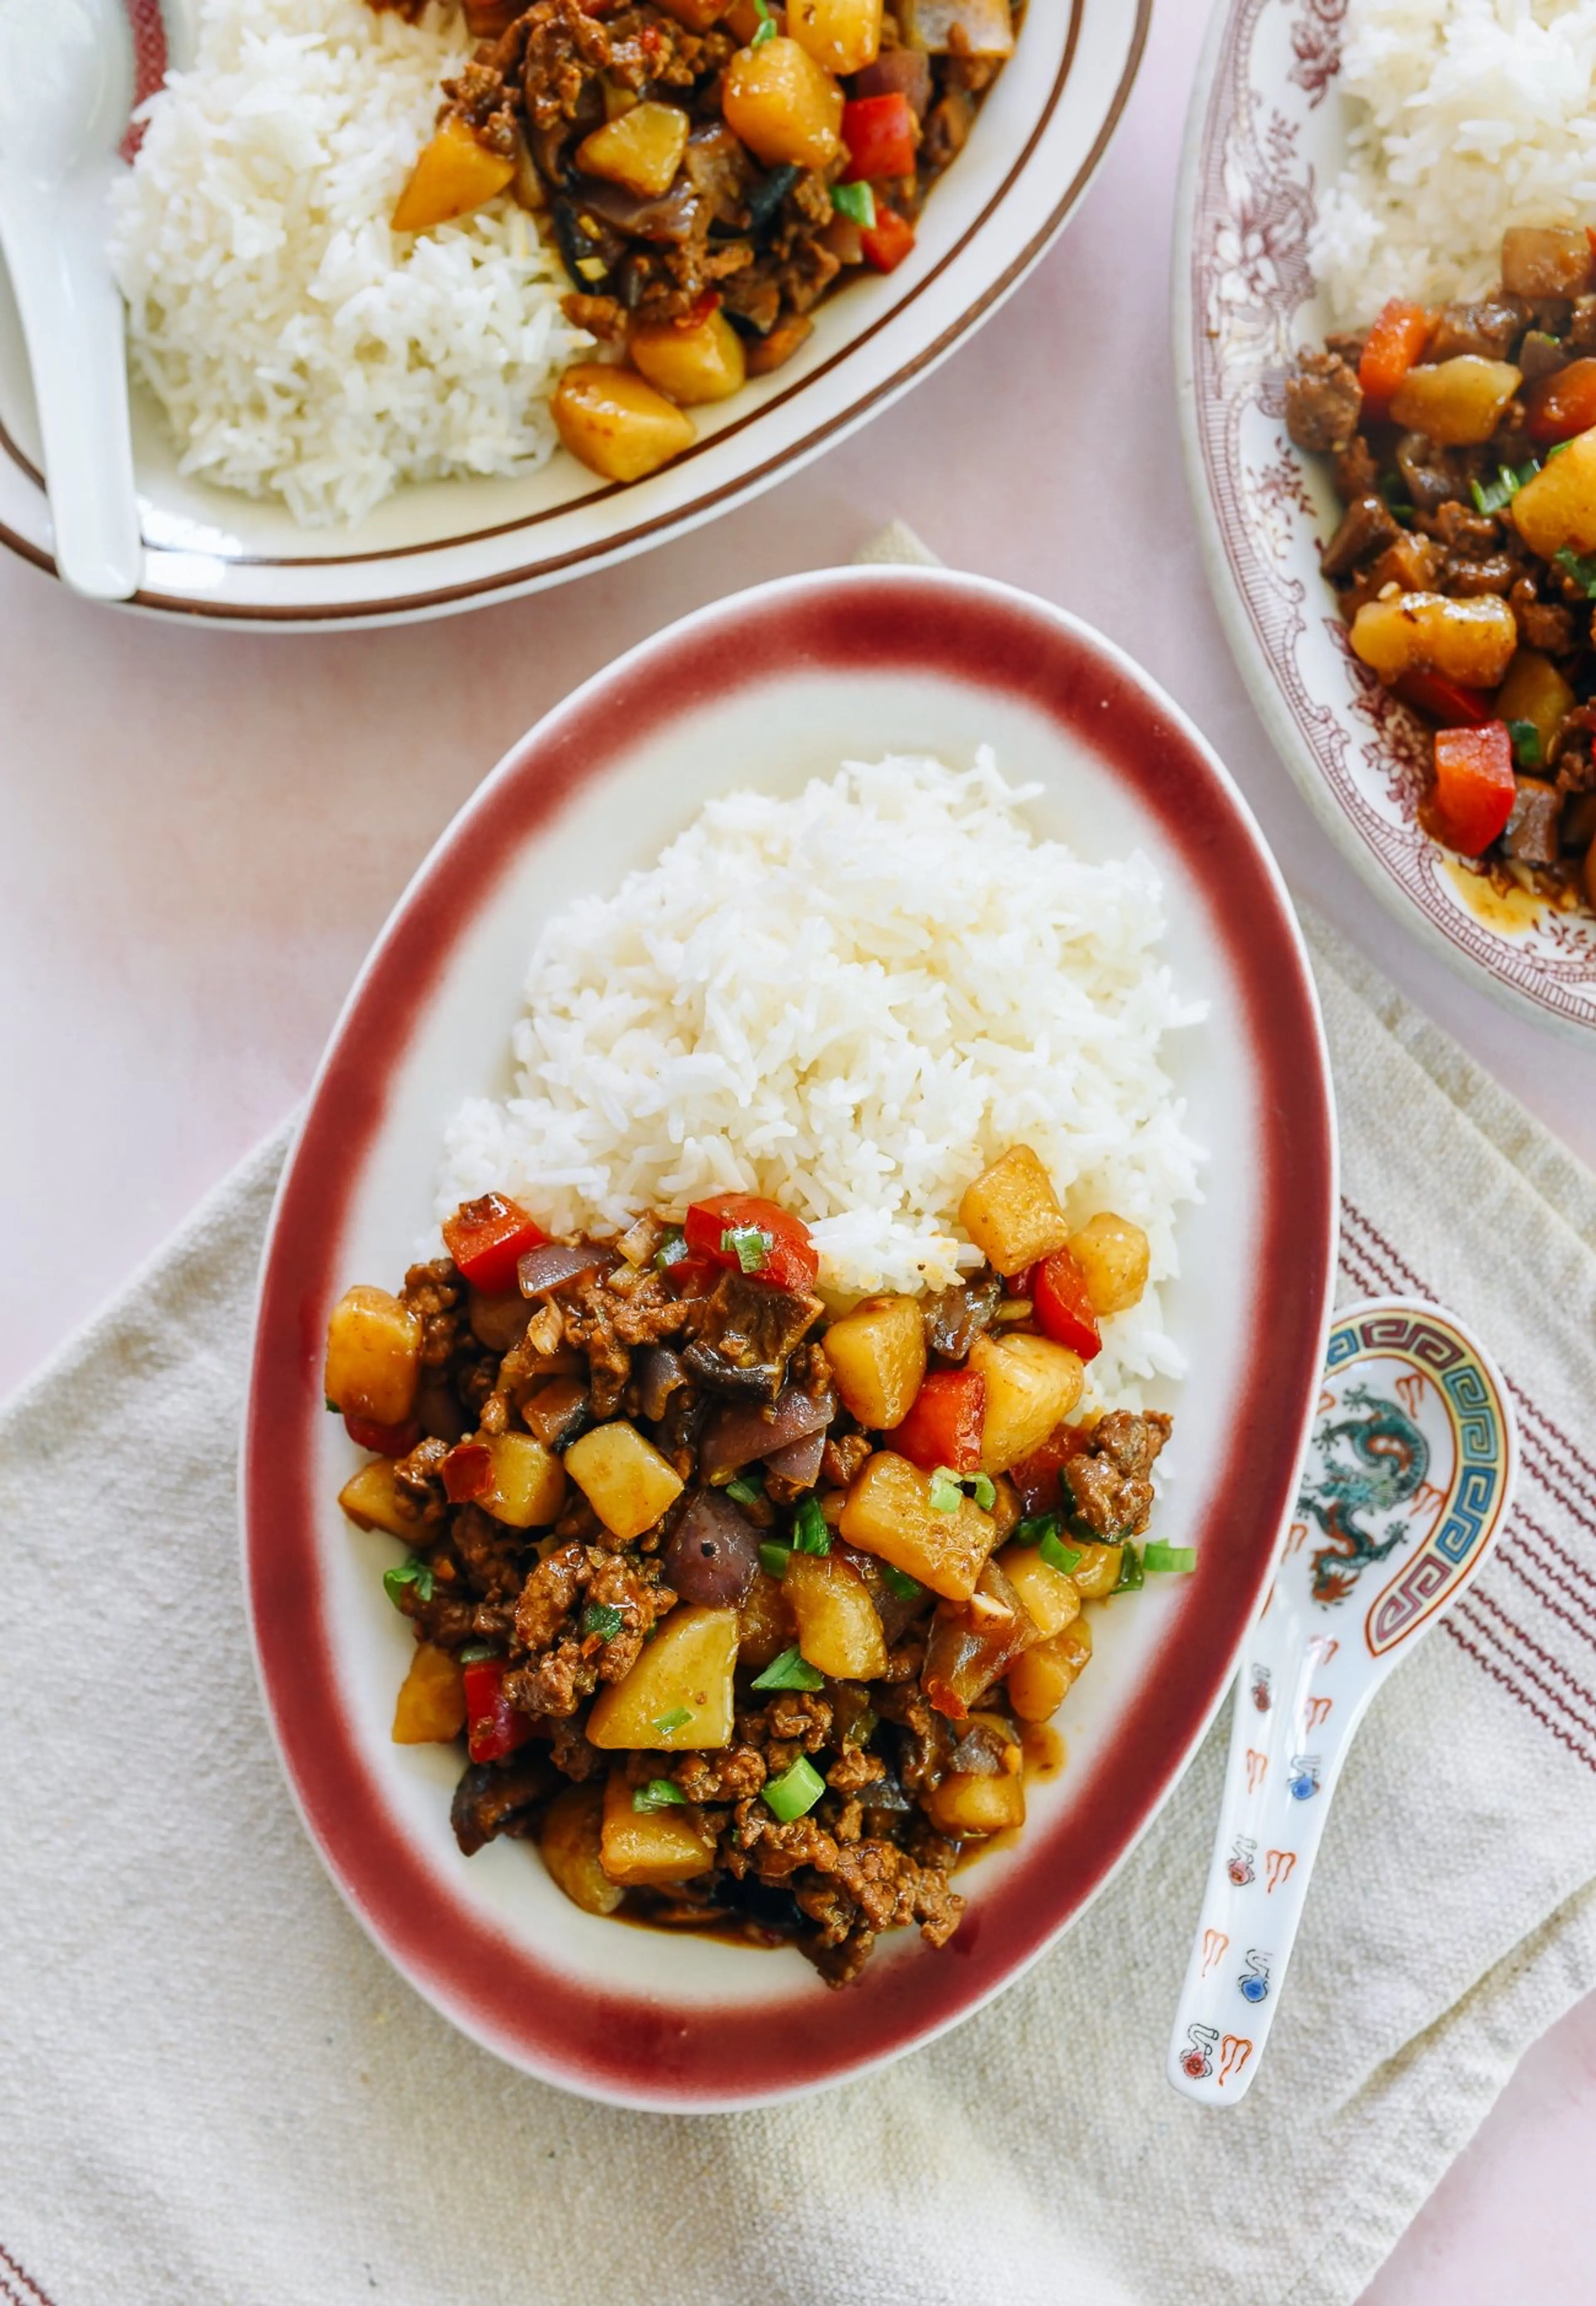 Braised Ground Pork & Potatoes (Chinese “Meat and Potatoes”)